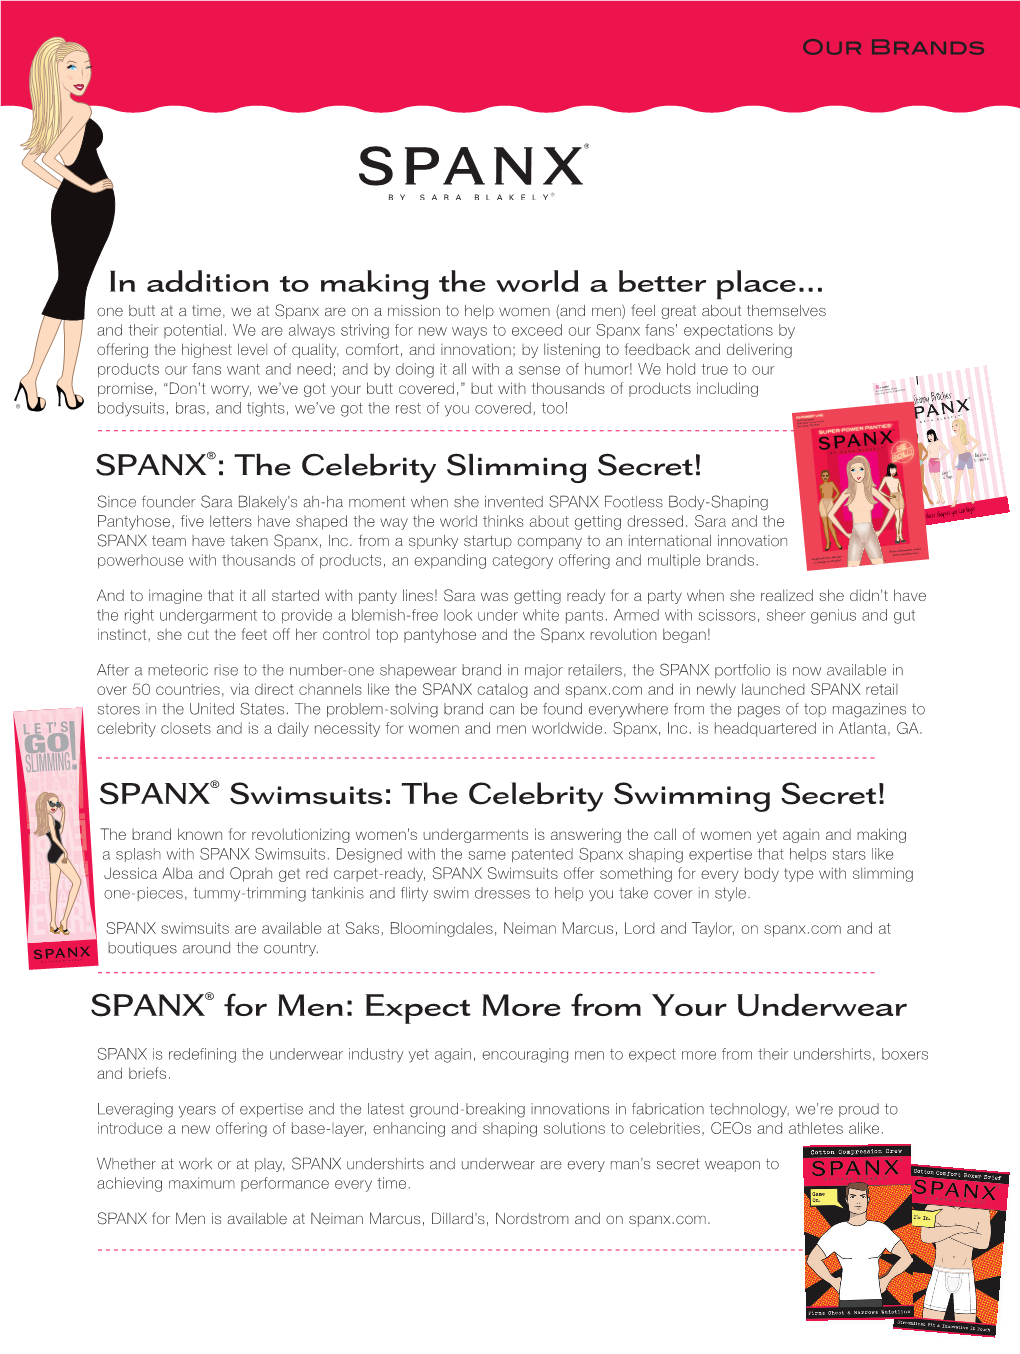 SPANX® for Men: Expect More from Your Underwear